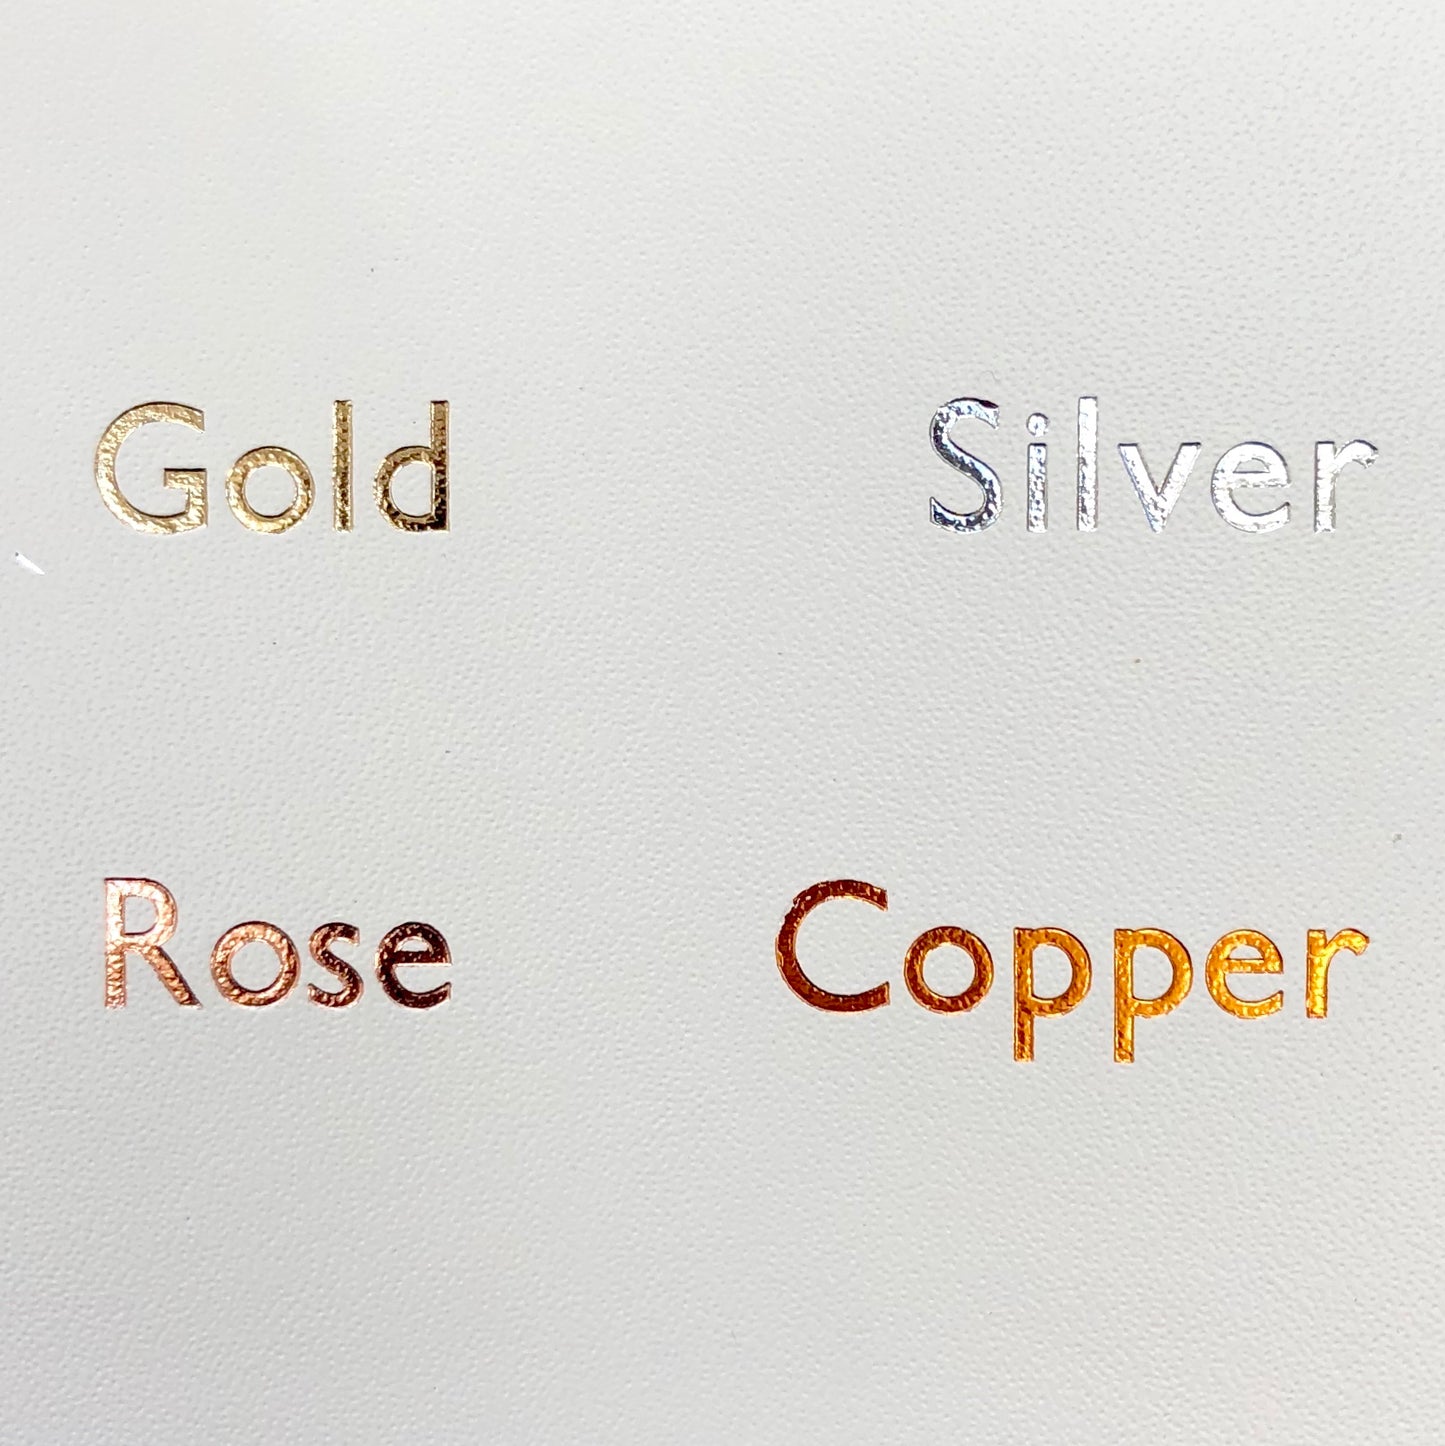 on a piece of white leather you can see the different colour foils with which you can print your wedding guest boo - gold, silver, rose gold and copper